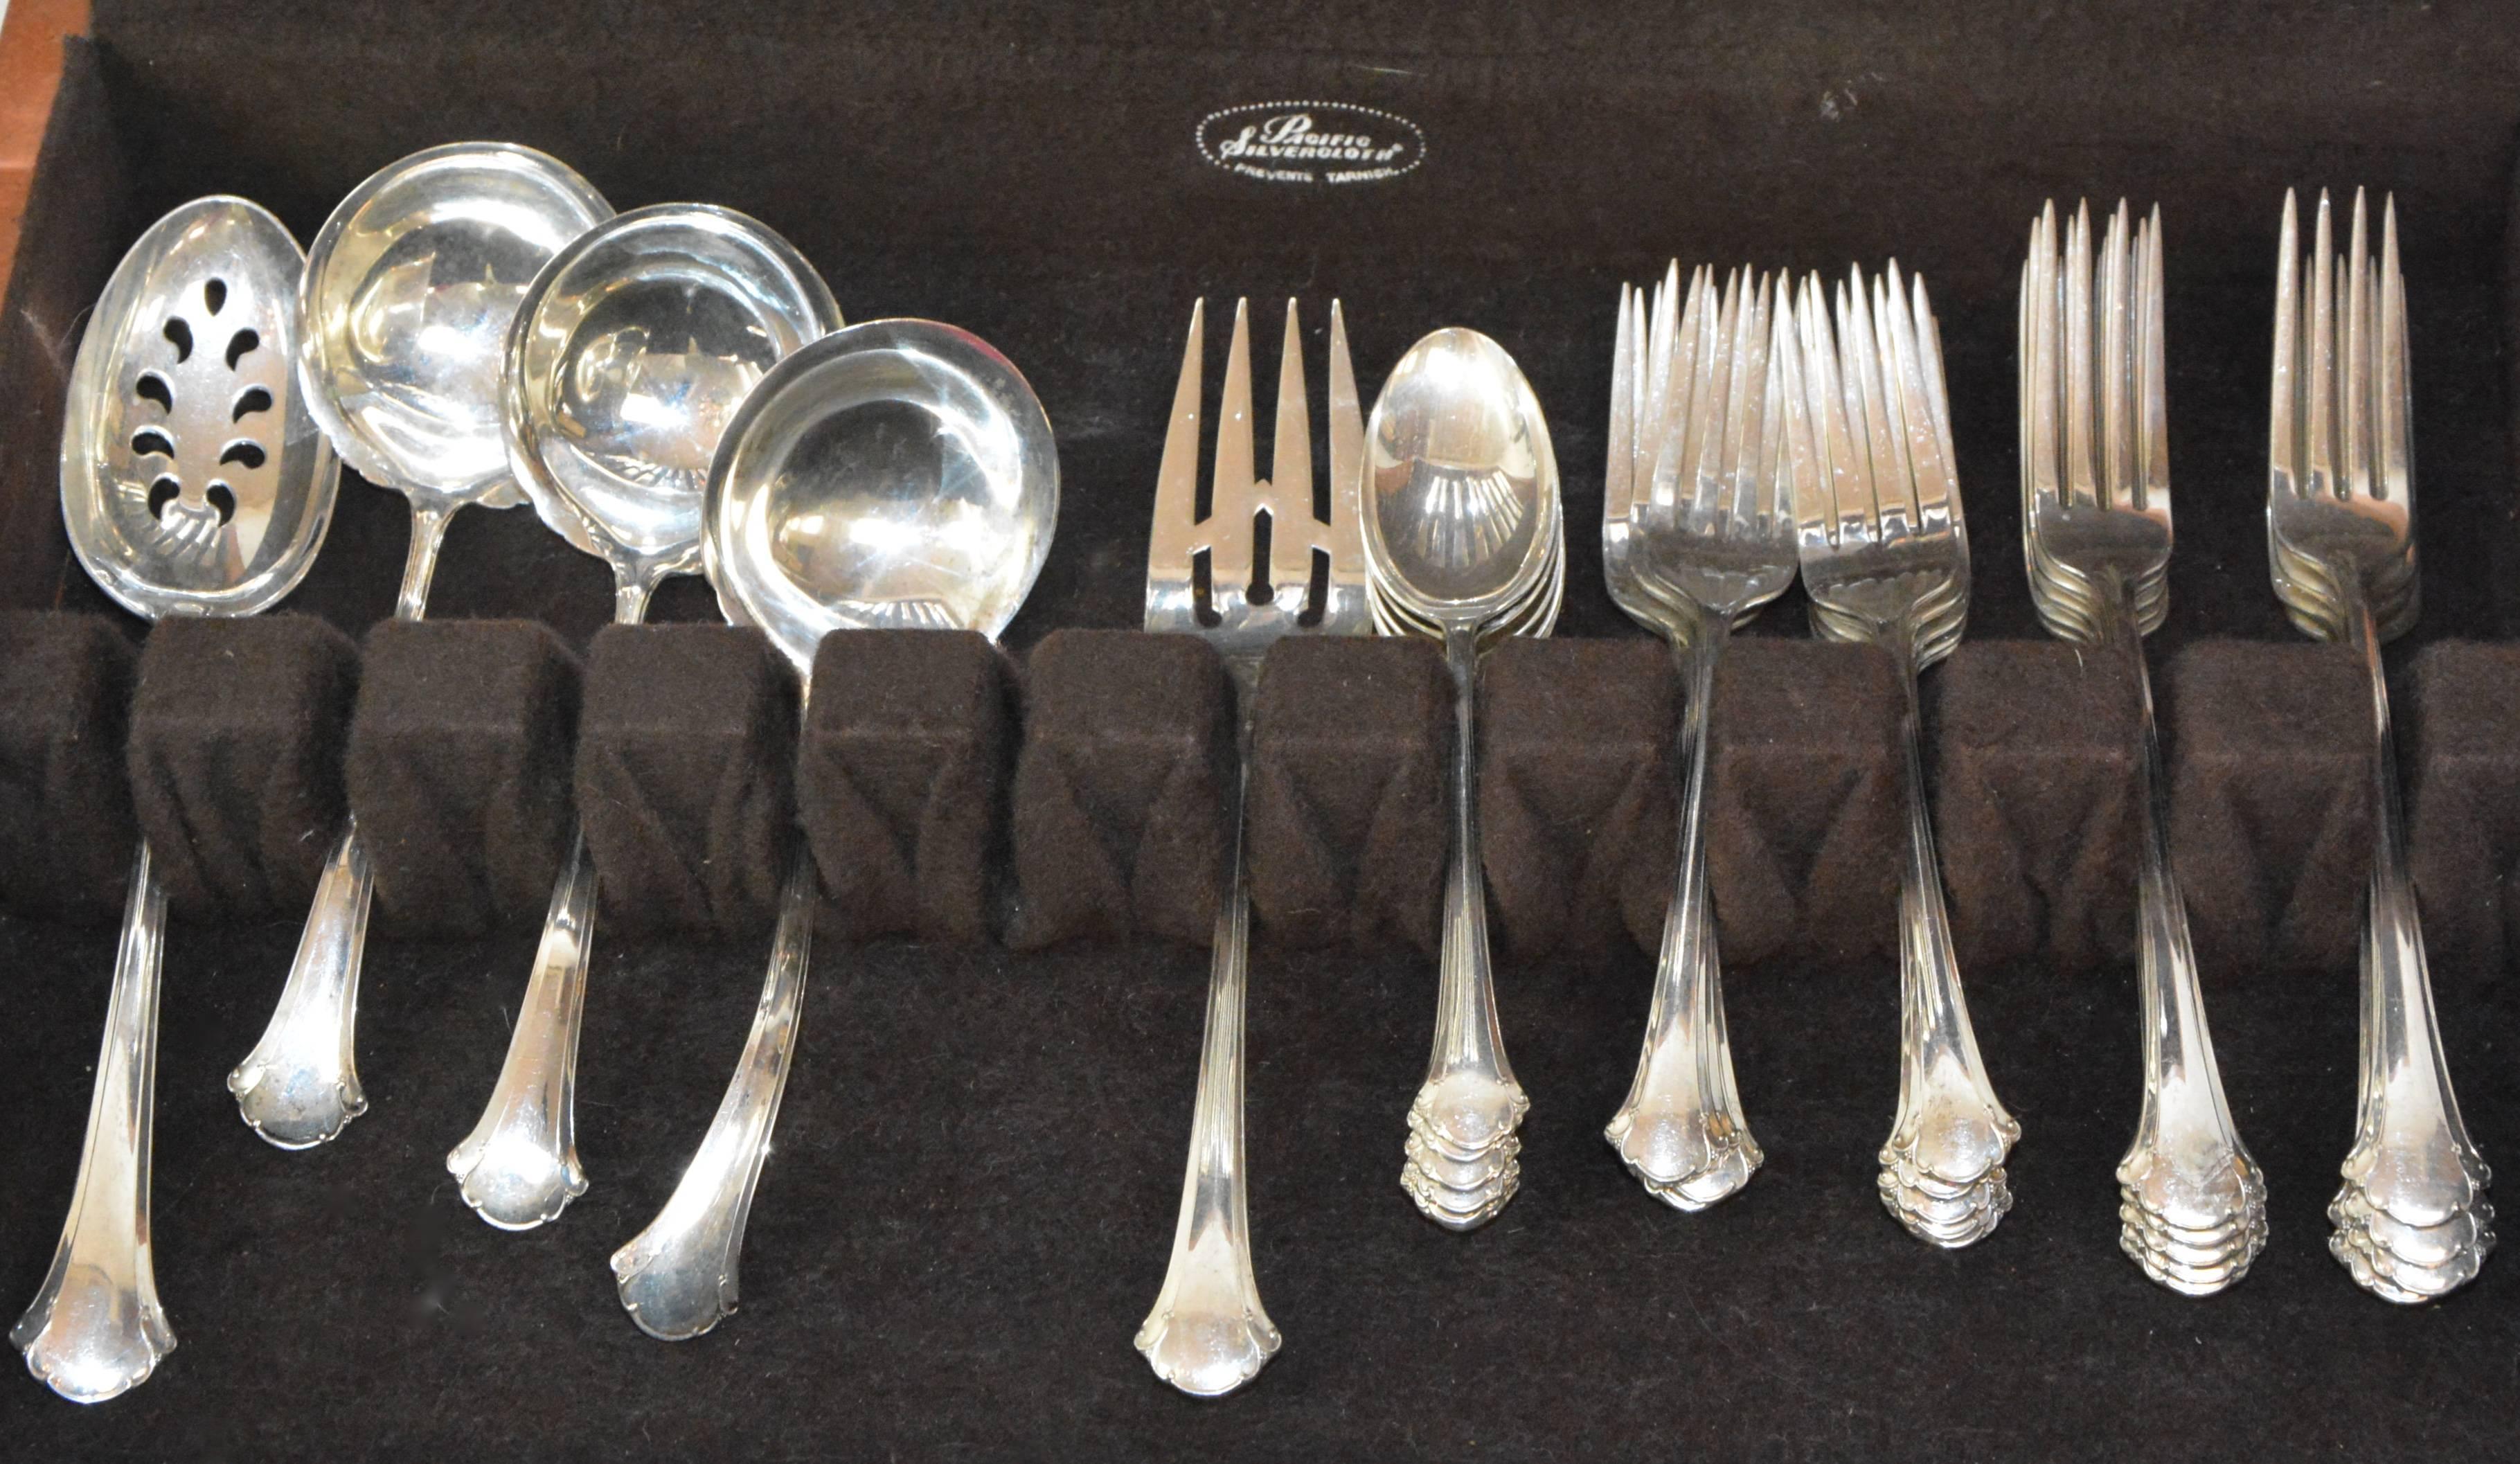 This is a Classic set of the Chippendale pattern of Towle sterling silver flatware. You will receive nine dinner knives, ten dinner forks, nine salad forks, six teaspoons and five serving pieces. The handles of the knives are sterling and the blades